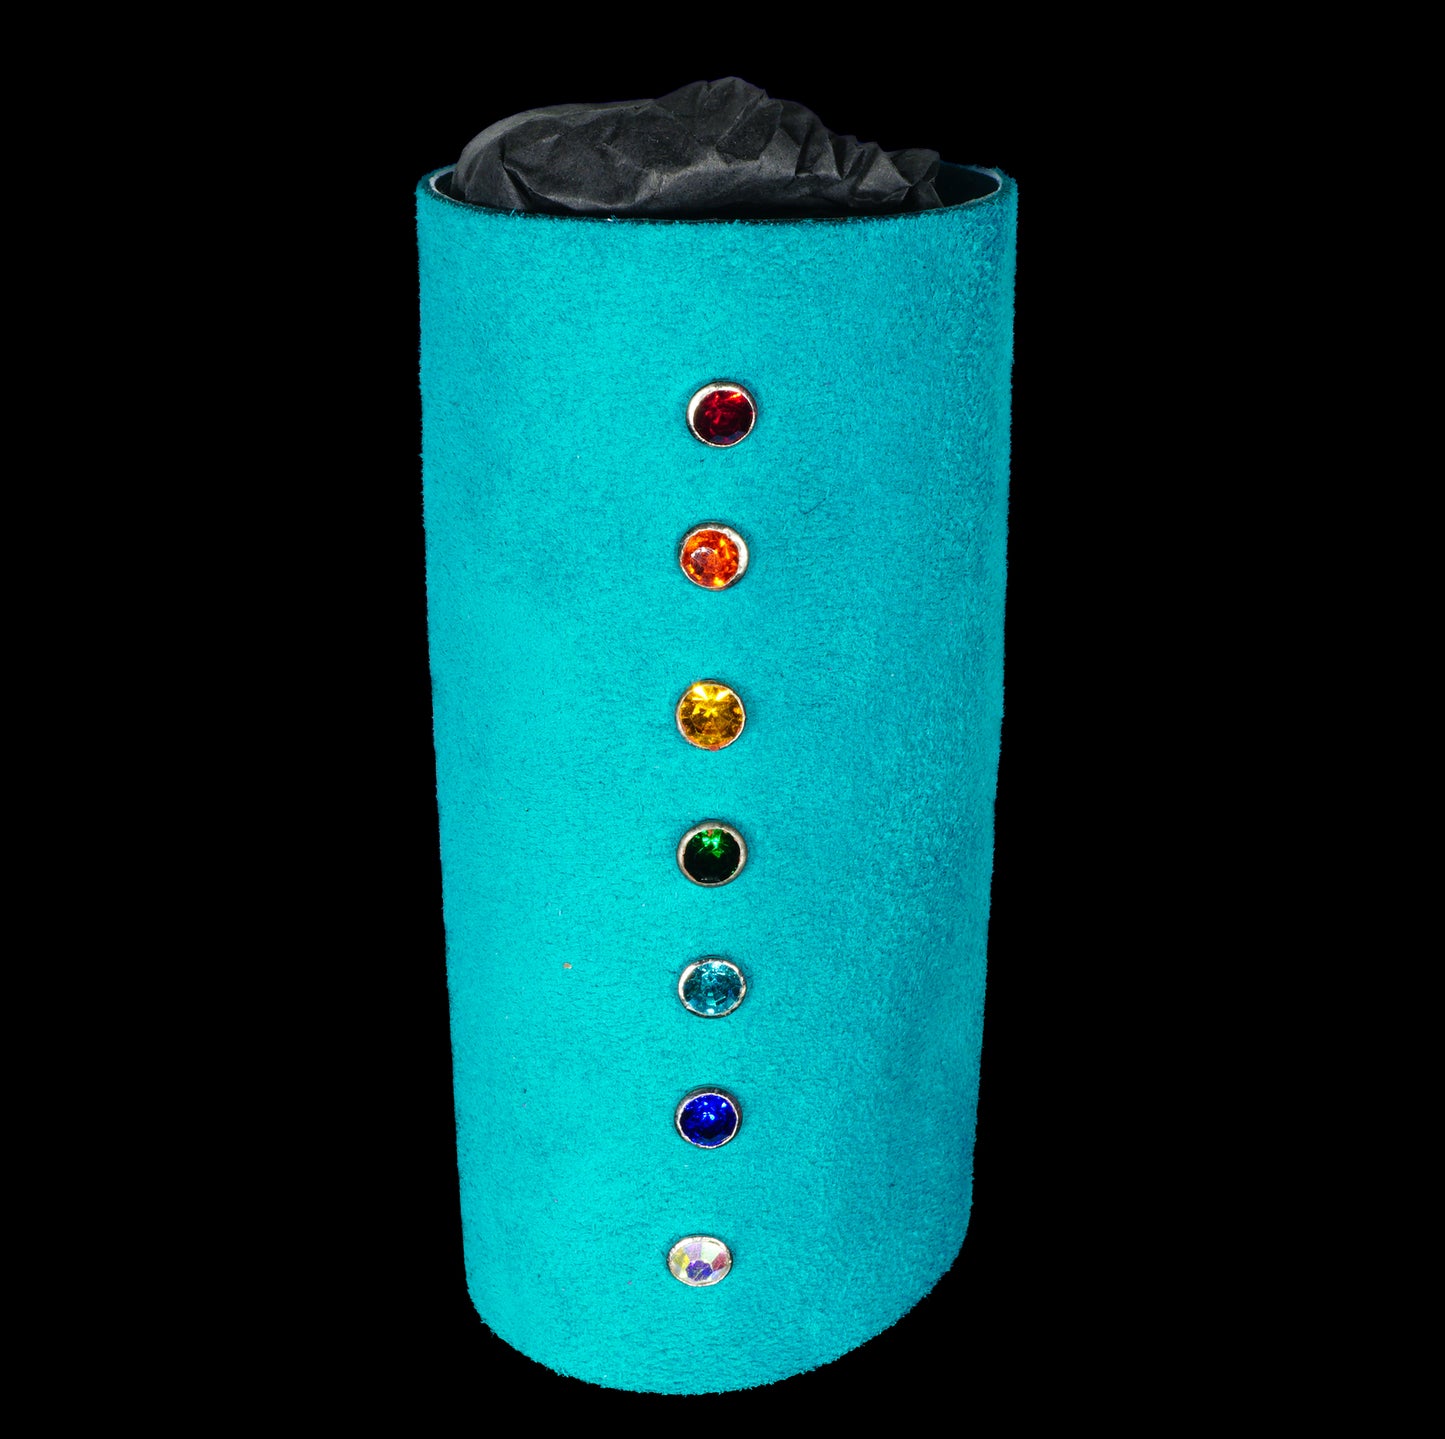 Blazer Torch Covers (various designs)